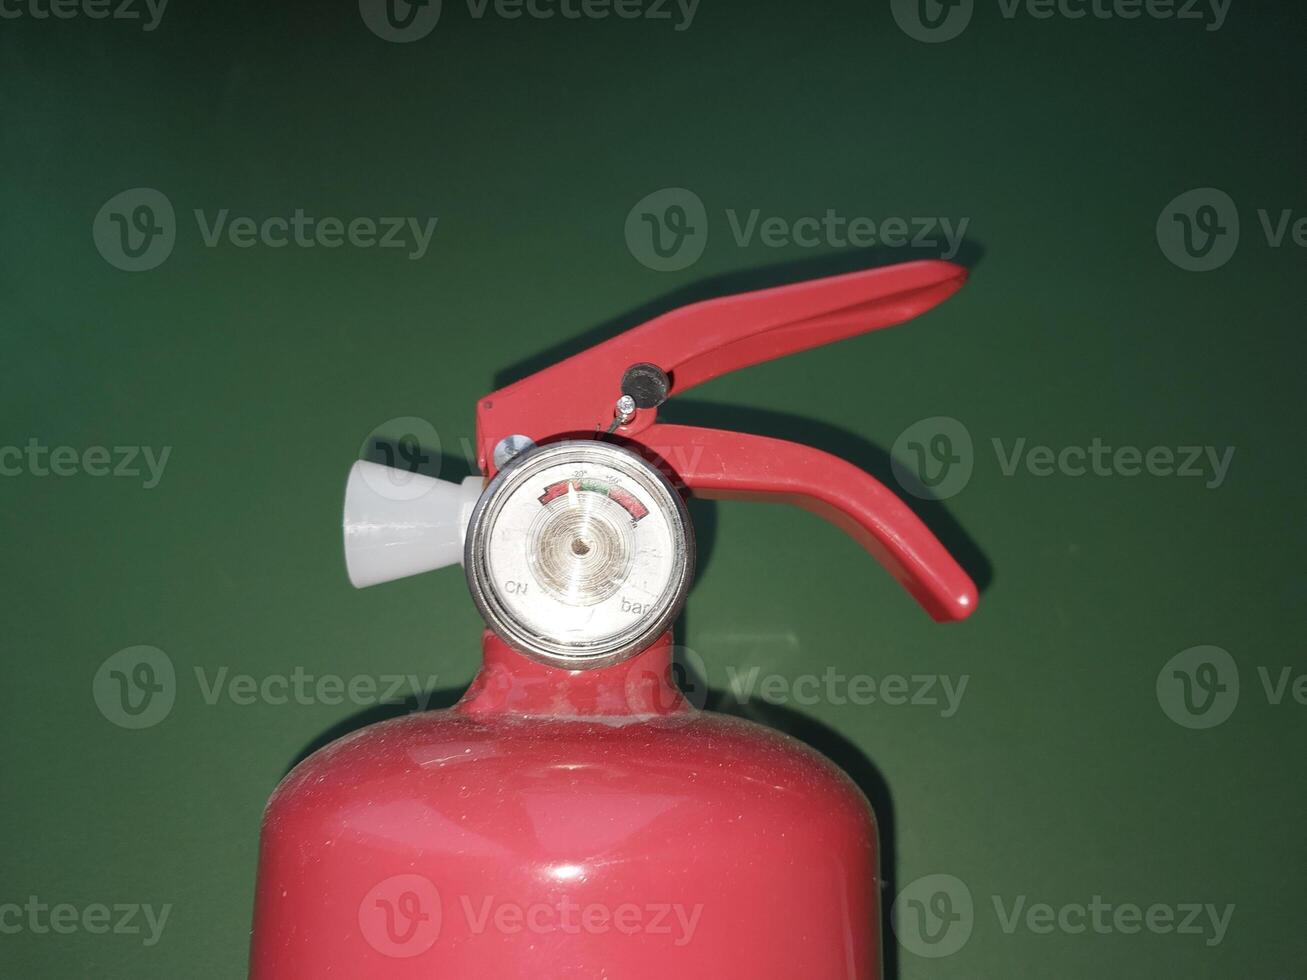 Manual powder fire extinguisher for extinguishing indoor fires photo